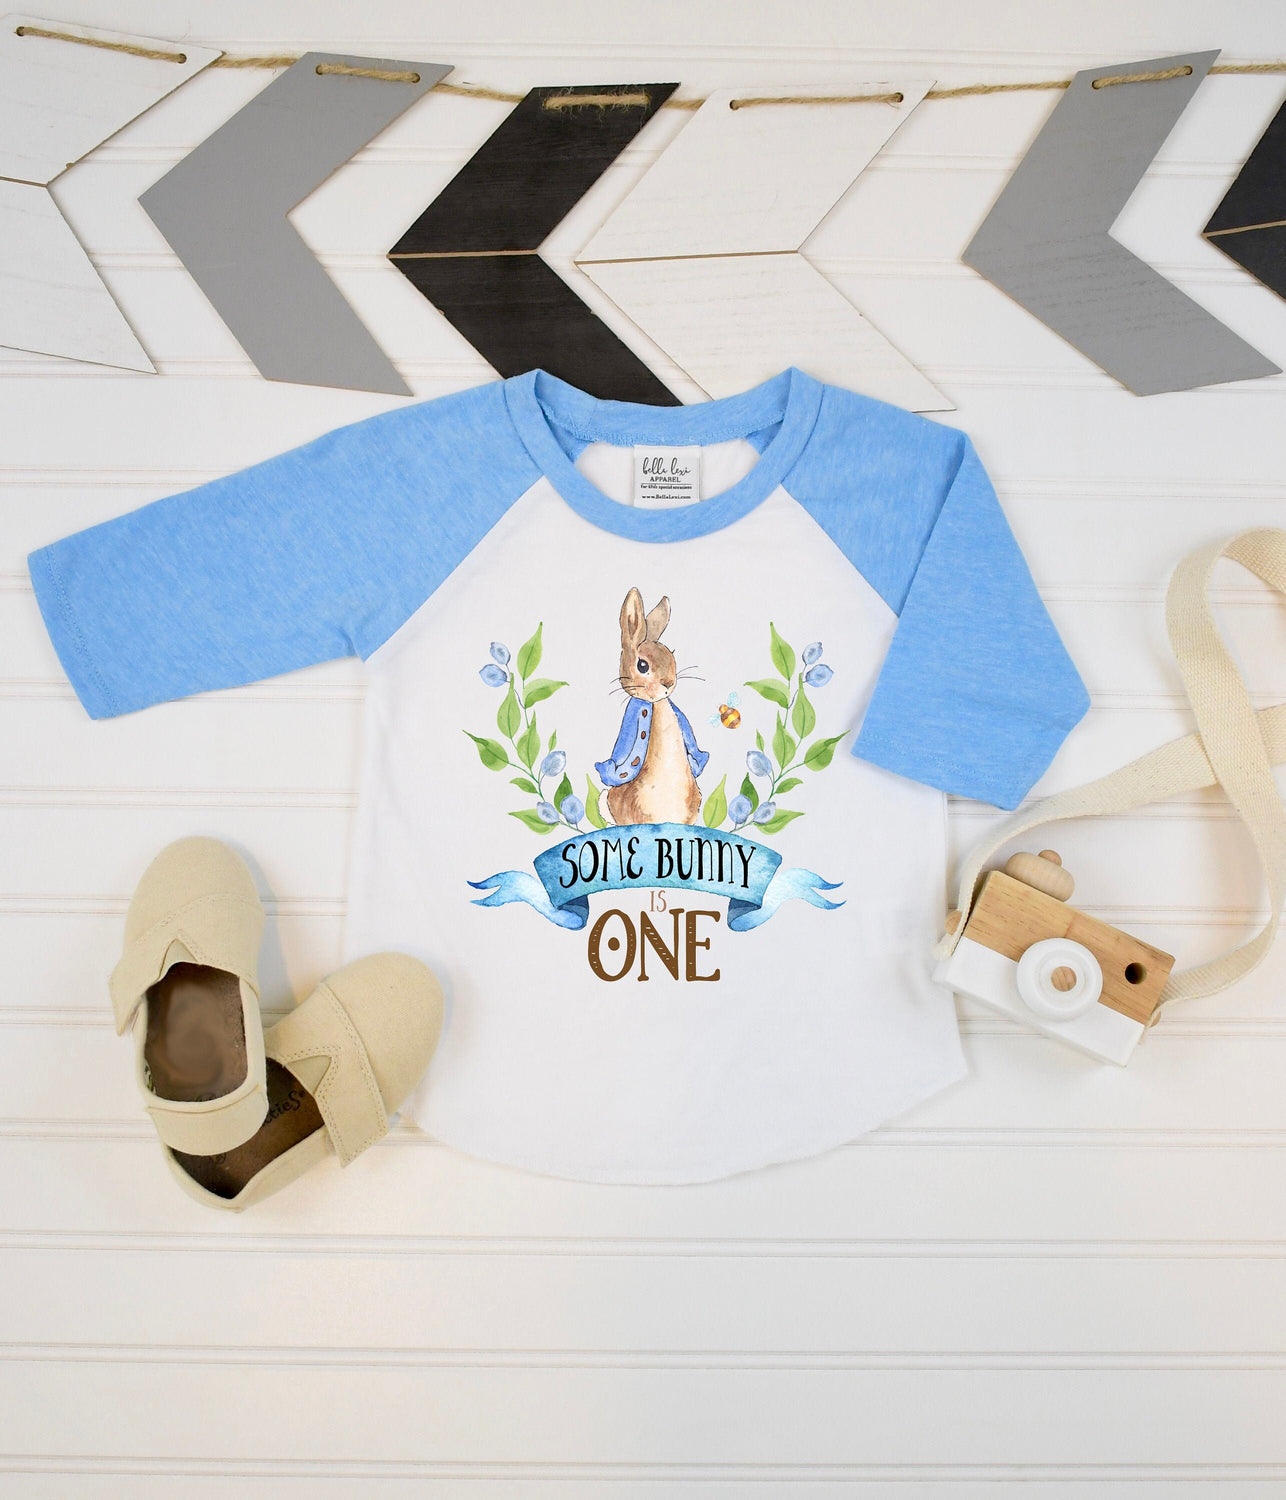 First Birthday Shirt, Some Bunny is One, Bunny Birthday shirt, Custom Birthday, One Bunny, Easter Shirt, First Birthday, BOY Birthday Set